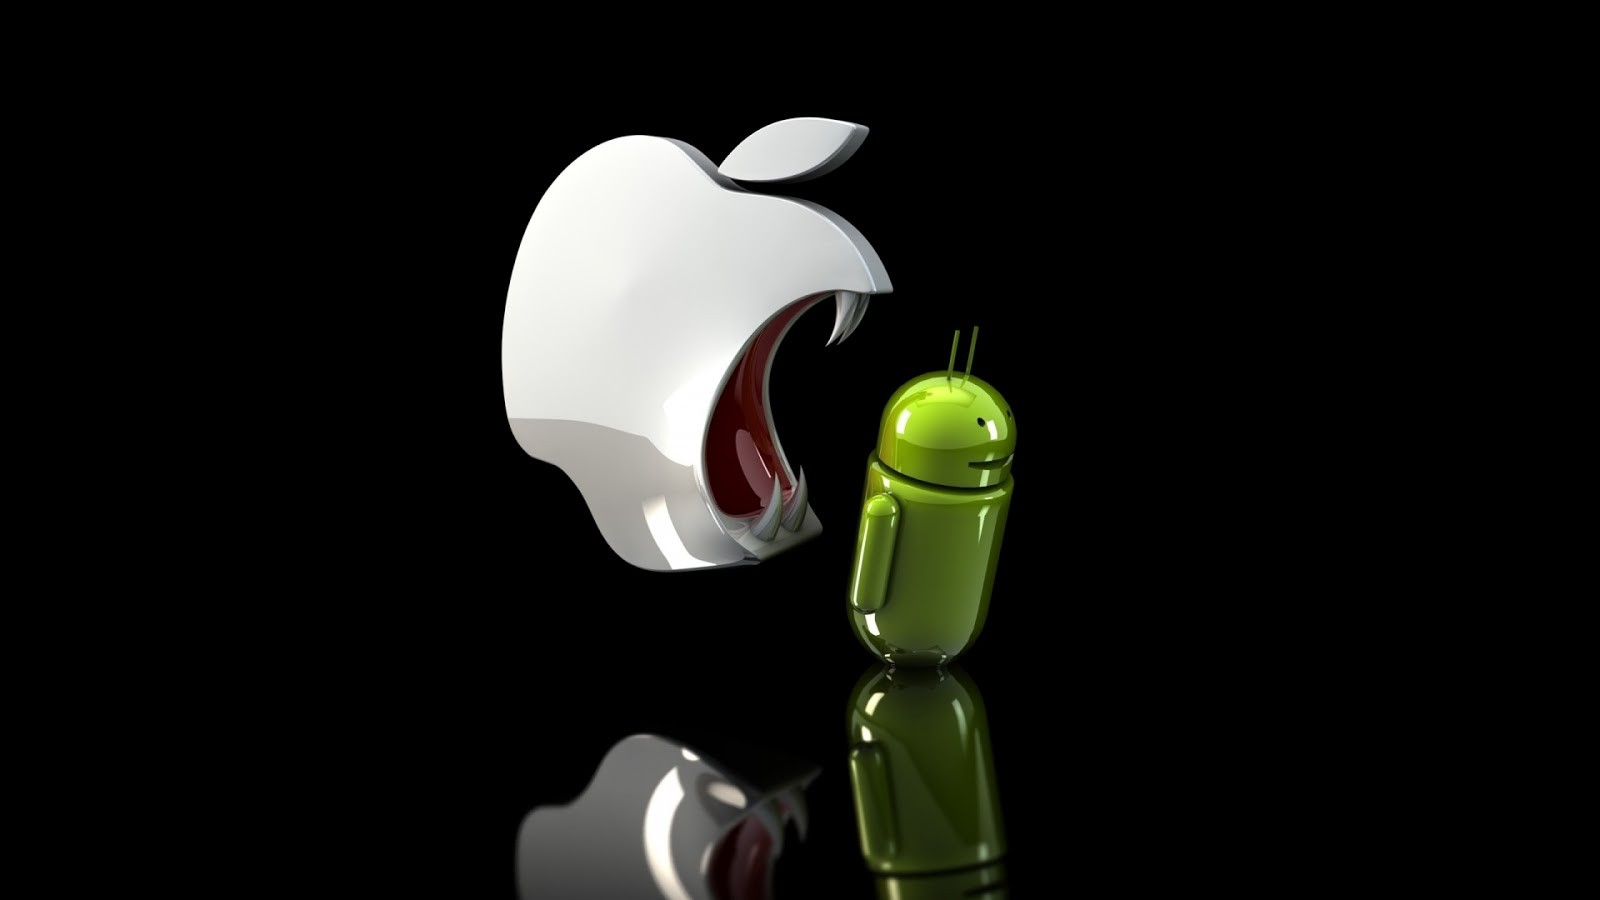 Apple Inc Android Operating System Render 3D Humor Reflection Digital Art 1600x900